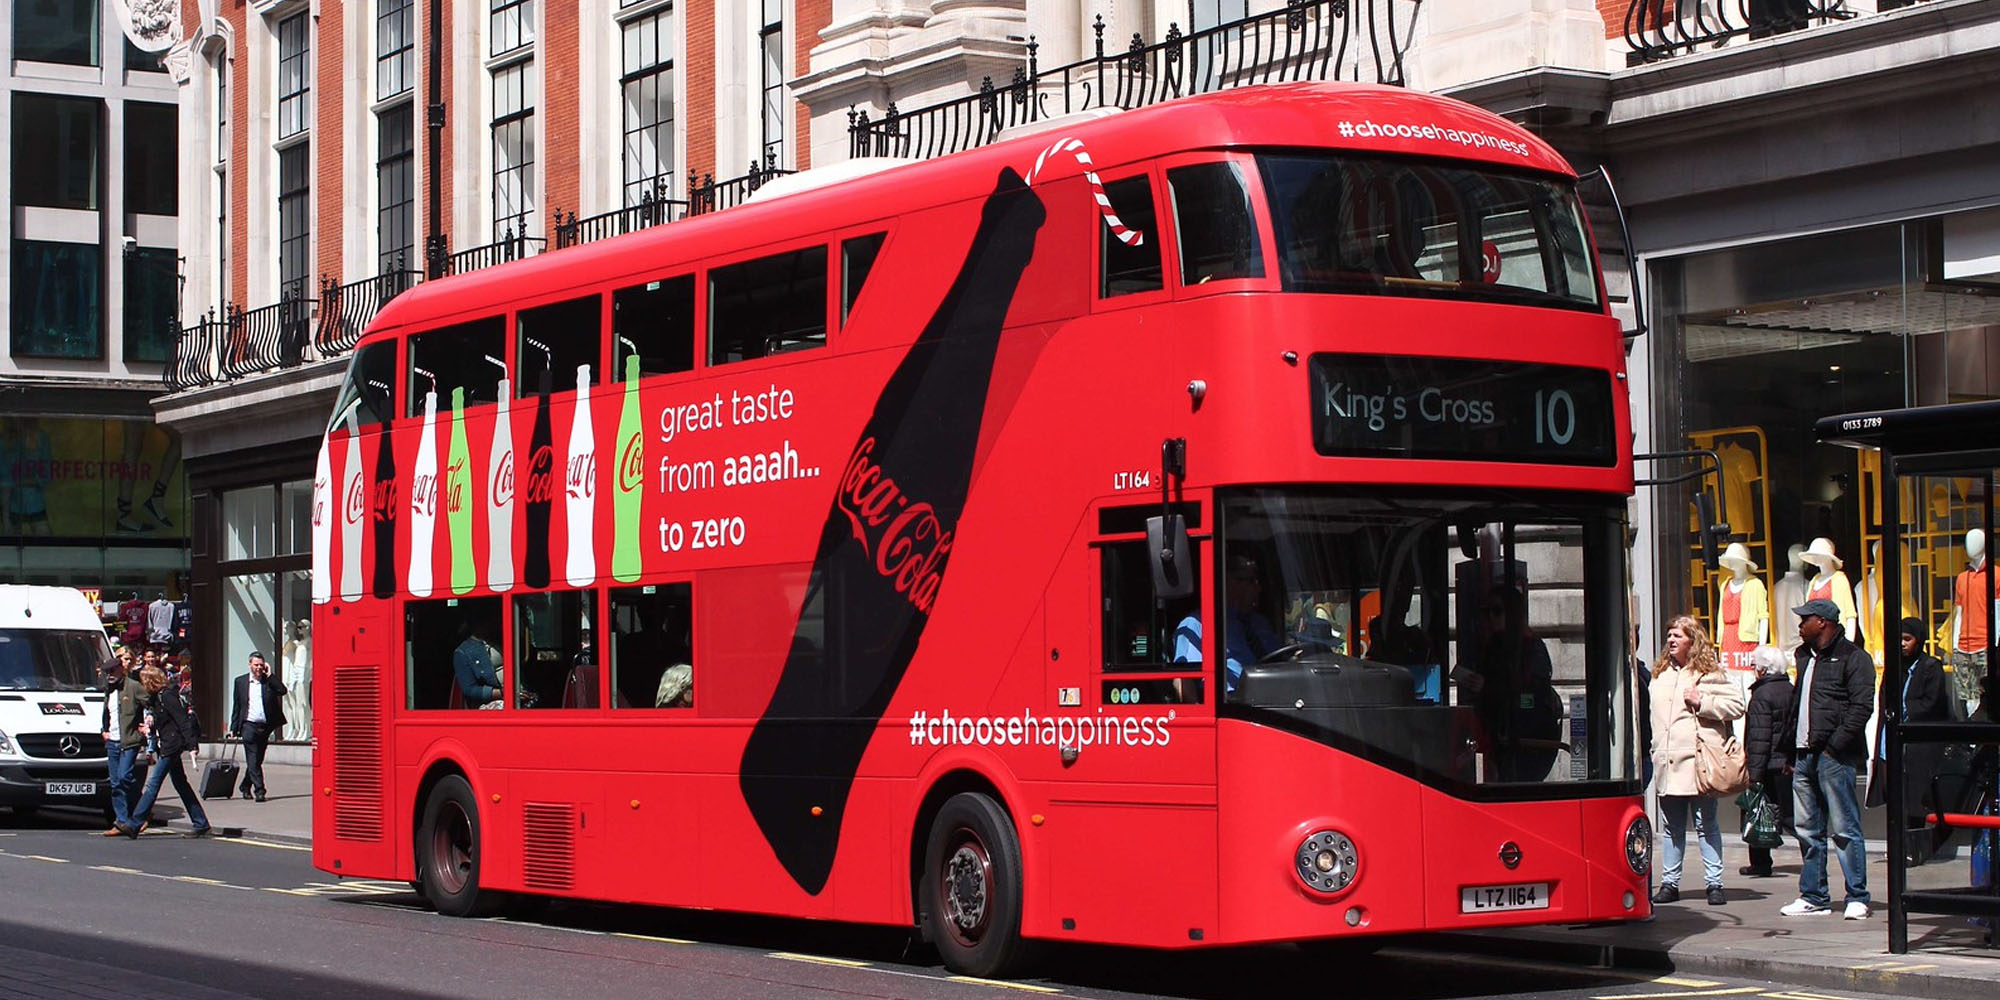 bus advertising design services from london bus advertising